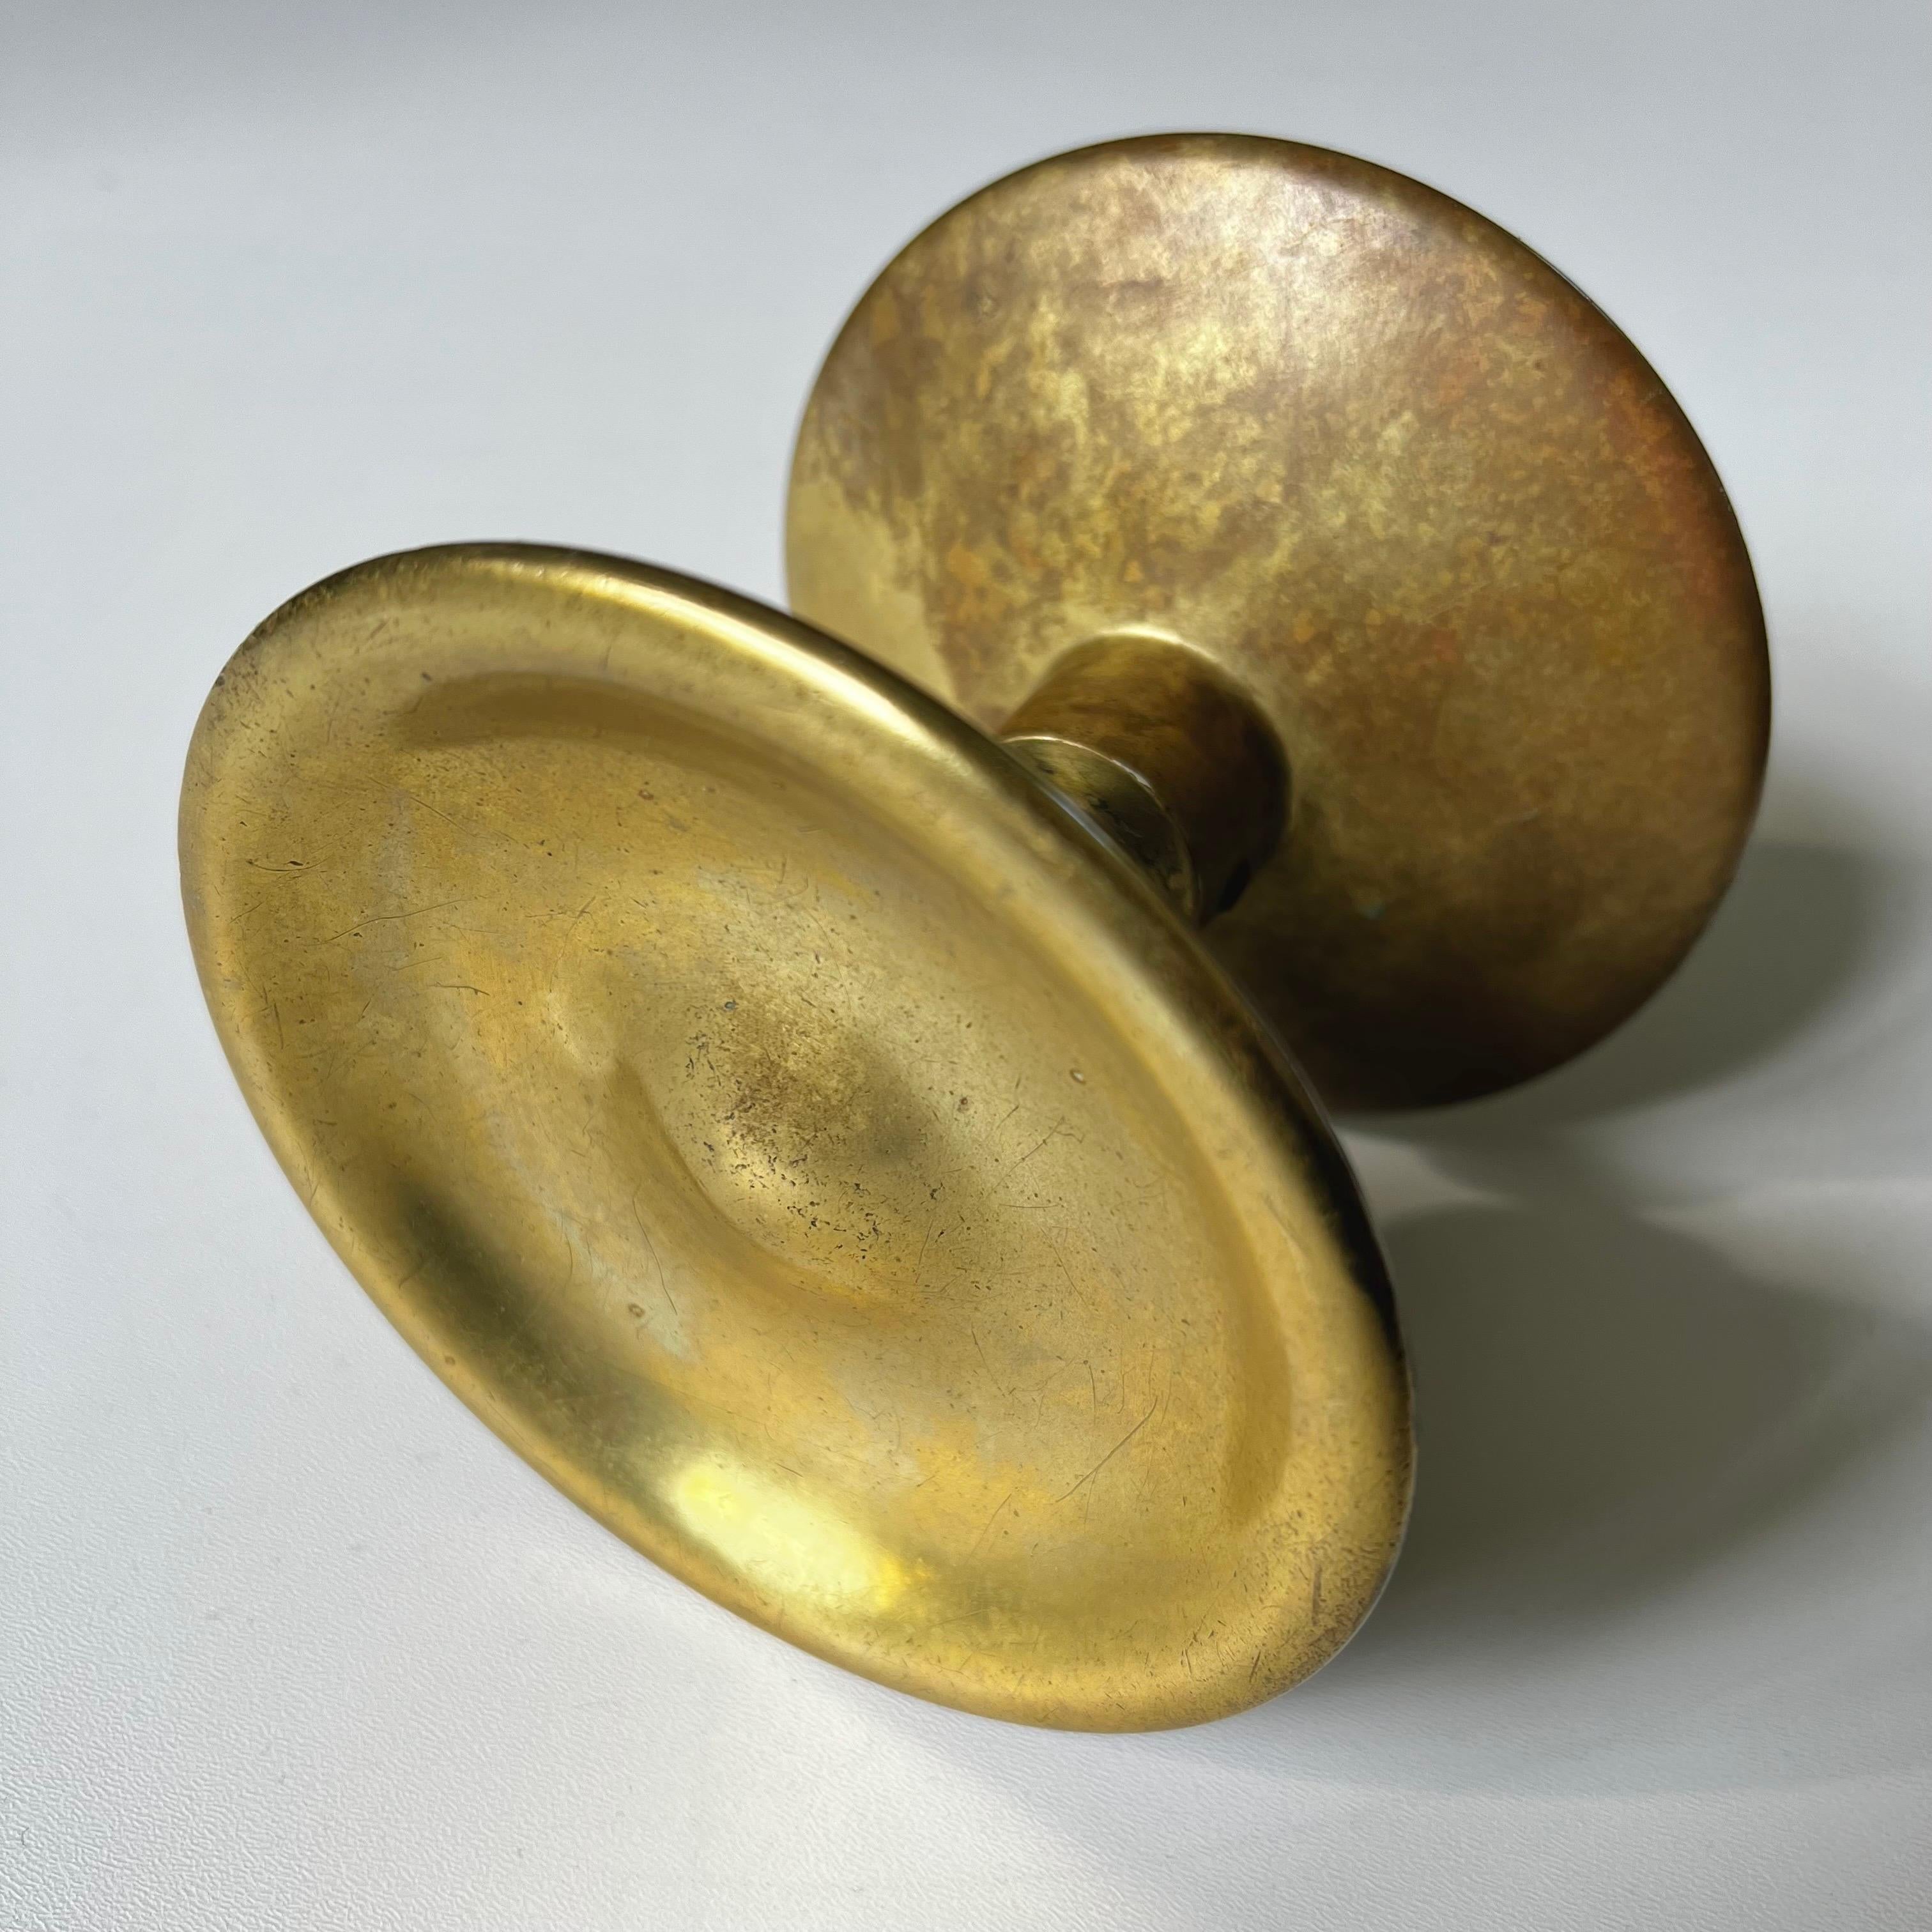 Circular push-pull door handle in bronze, early to mid-20th century, France.

A very simple elegant handle, made up of two separate round pieces; each side slightly contoured. The components are in good vintage condition with age-appropriate signs